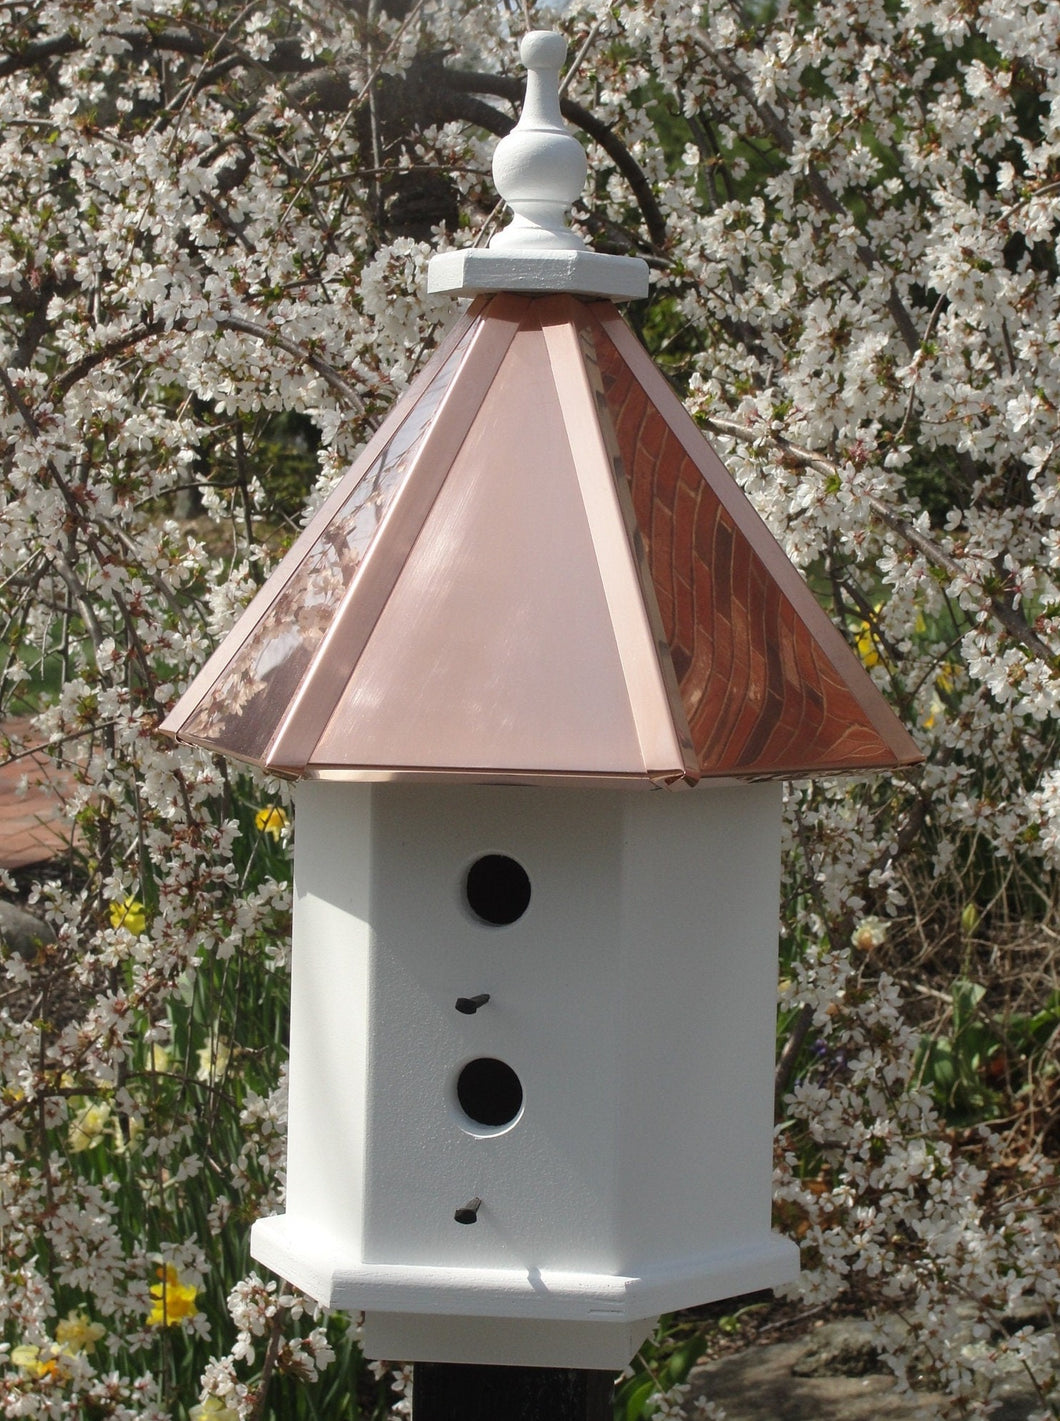 Birdhouse Copper Roof Handmade Wooden With 4 Nesting Compartments Birdhouses Outdoor